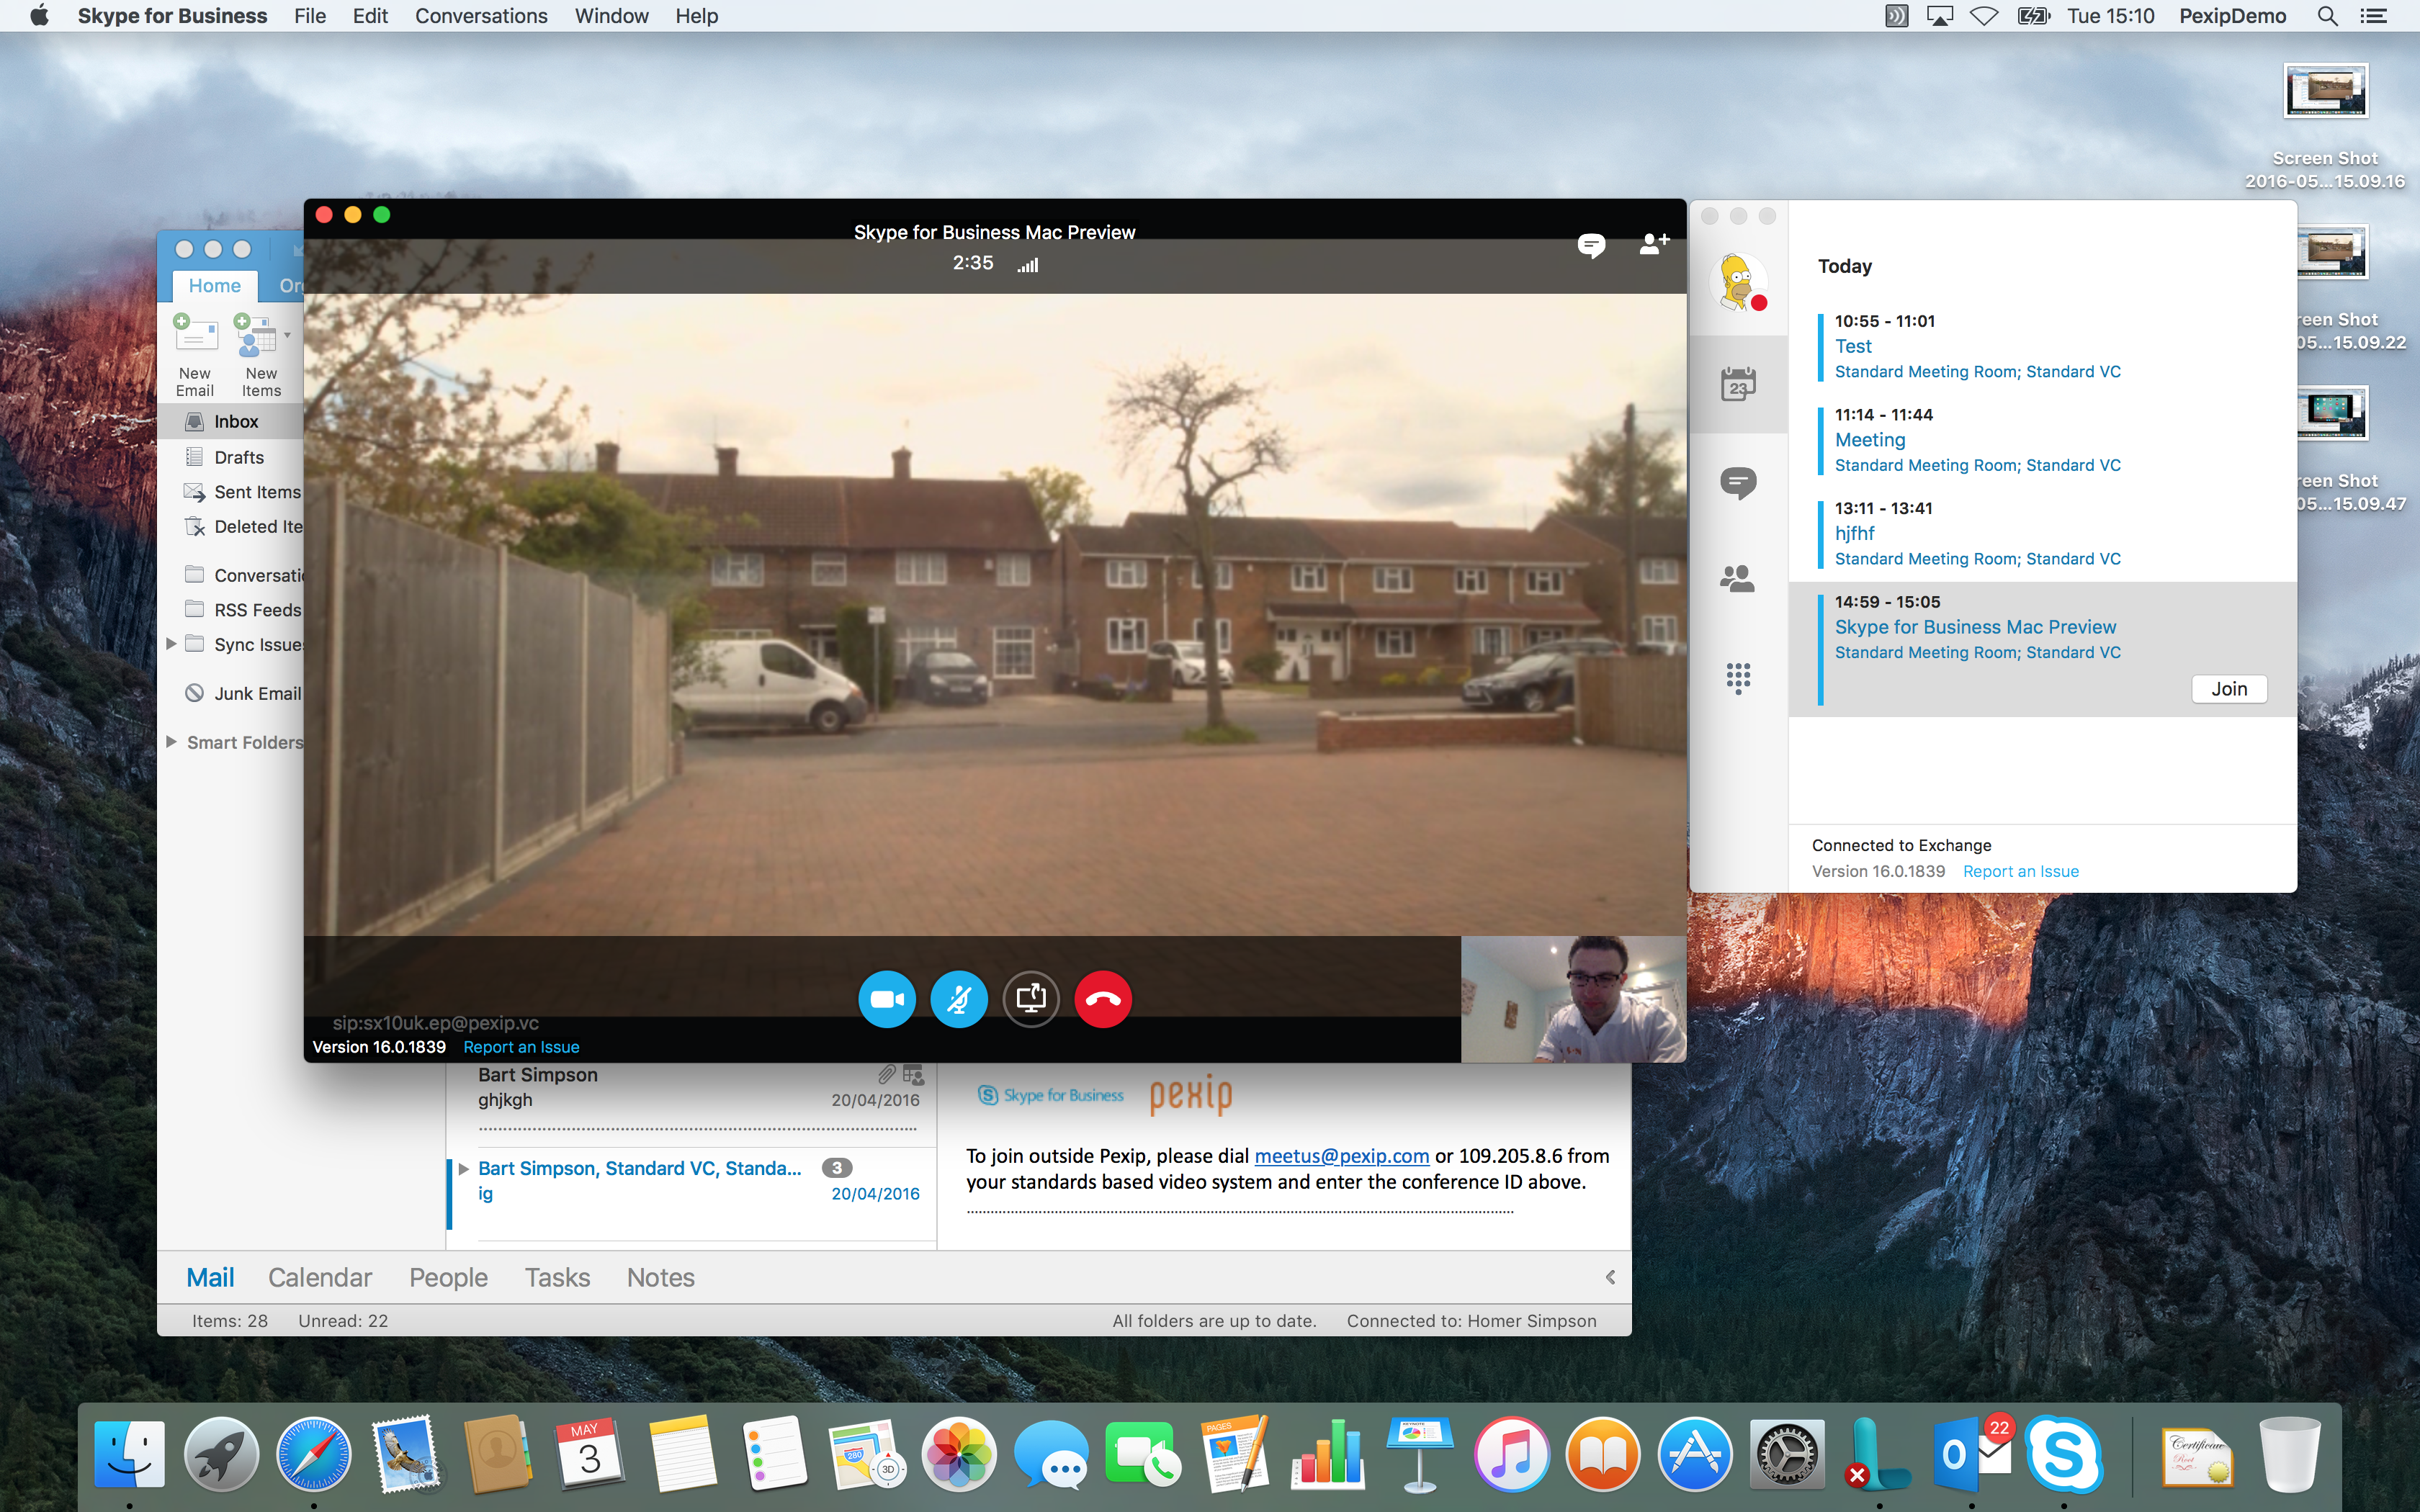 skype for business mac 2016 release date